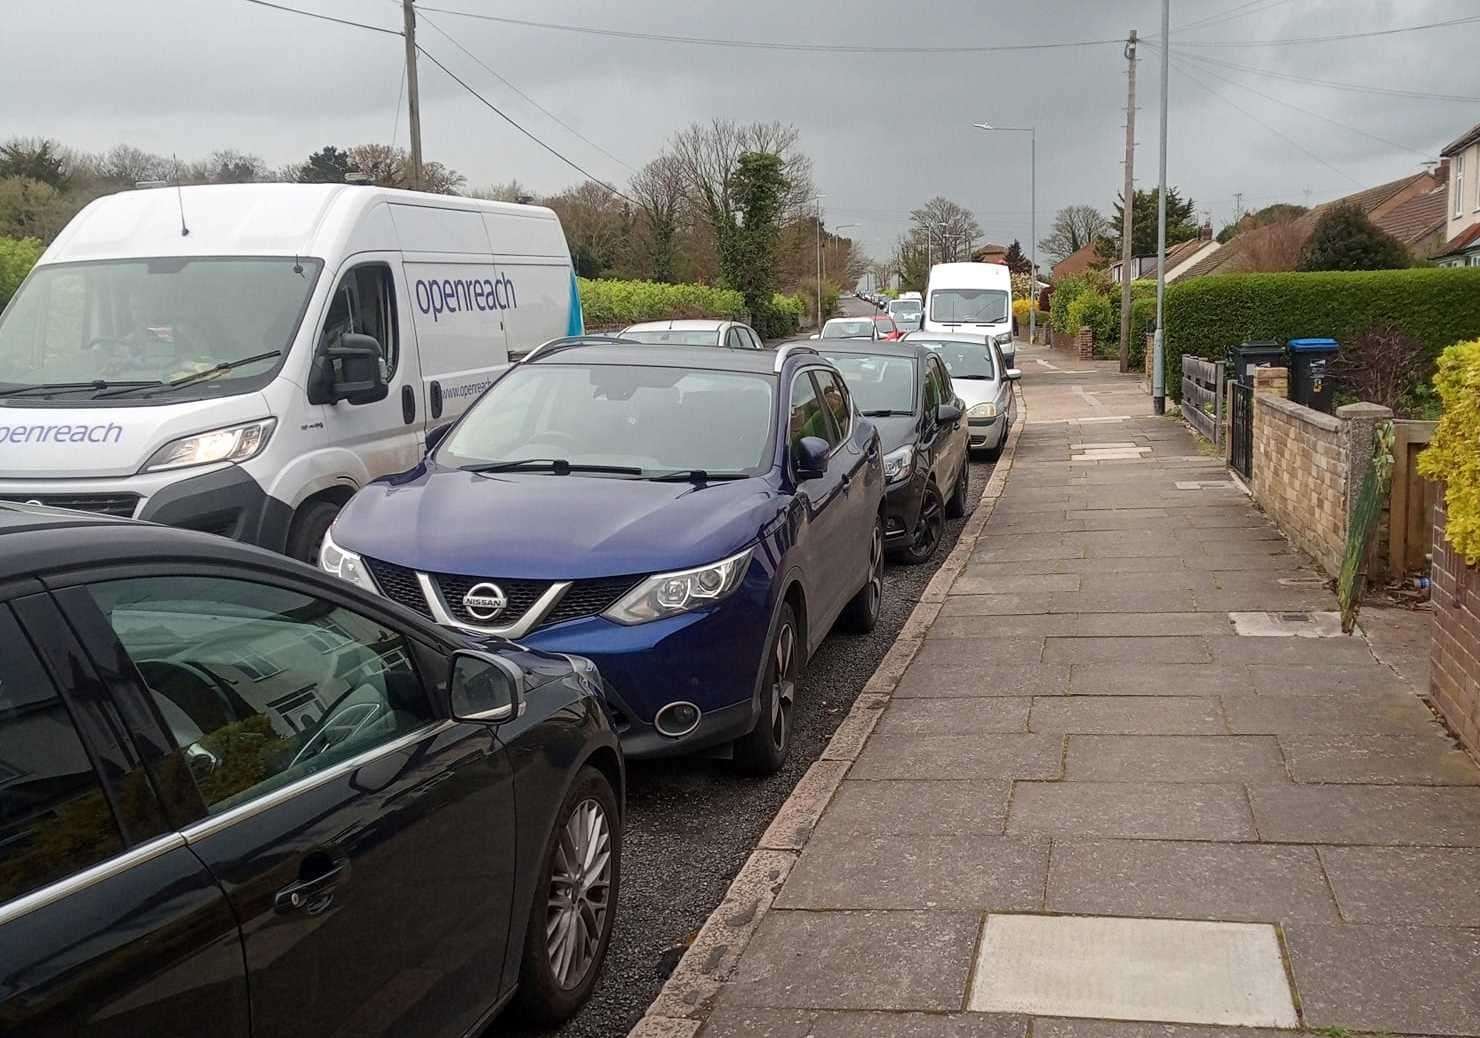 The area surrounding Haine Road in Ramsgate has been 'gridlocked'. Picture: Richard Baxter (63591779)